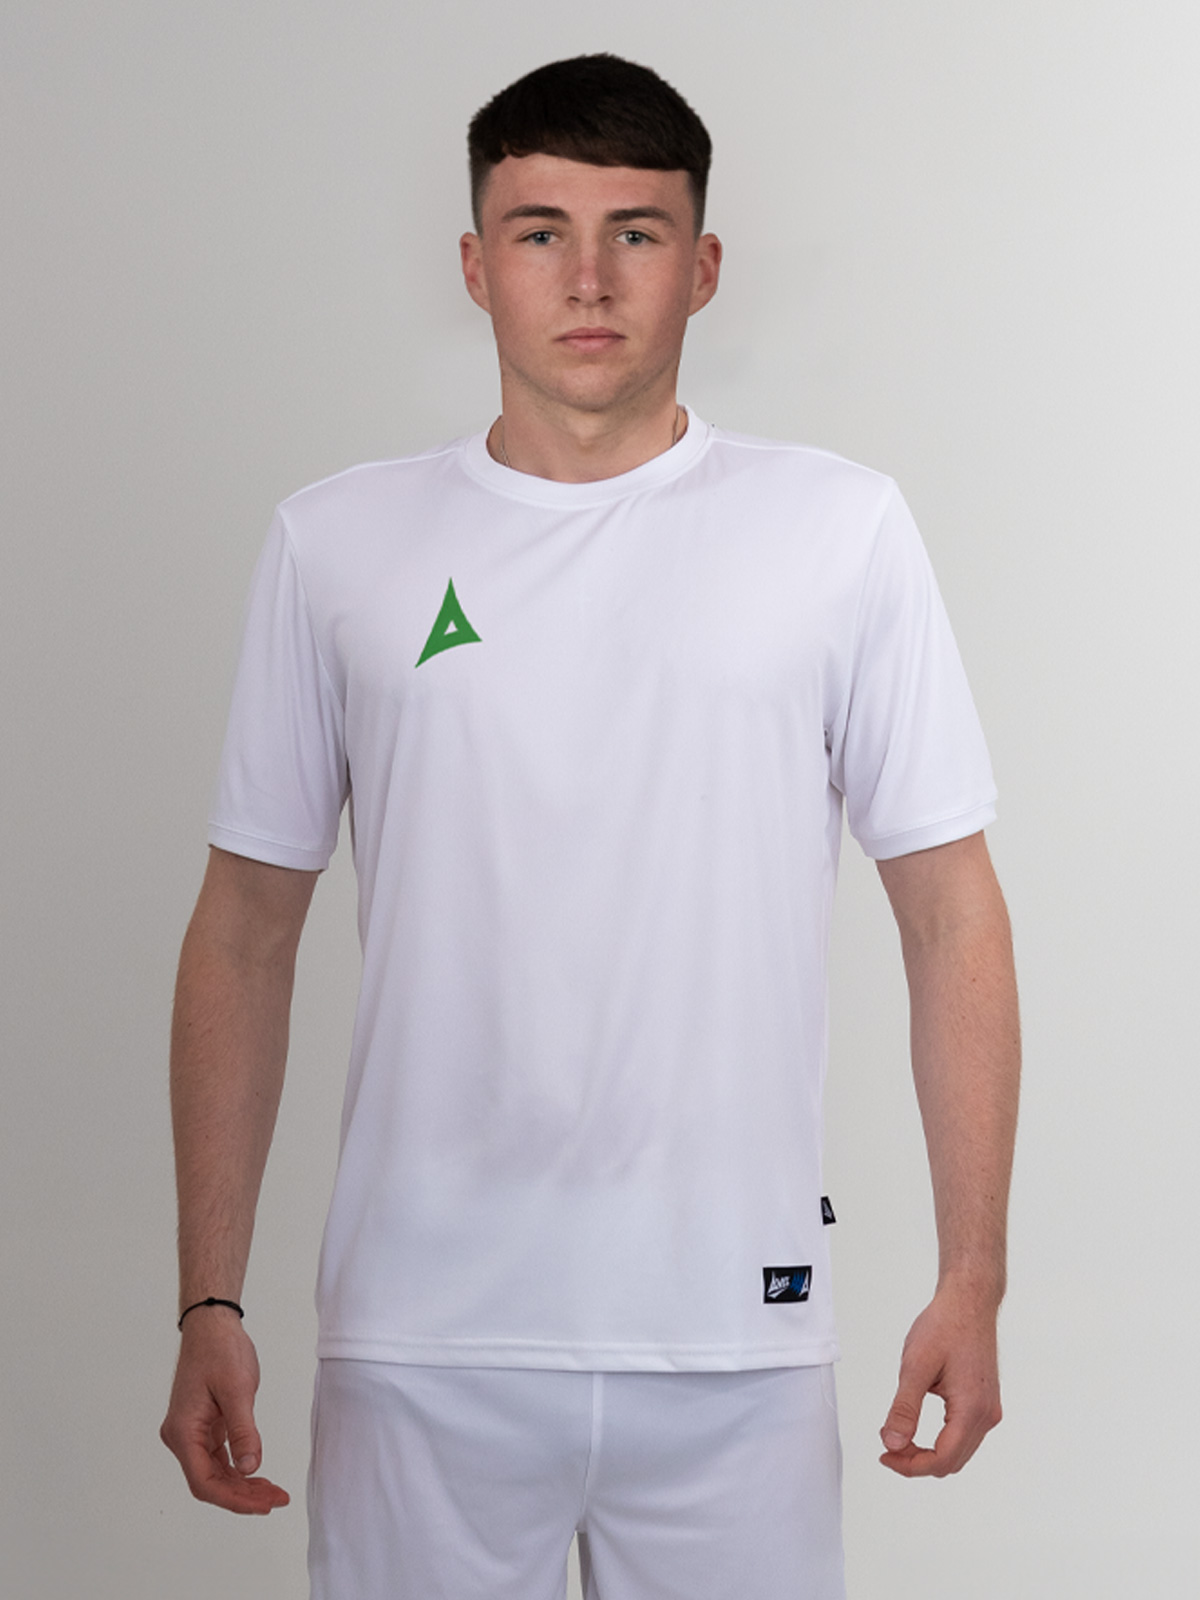 a white shirt with a green logo can be worn with white or green shorts